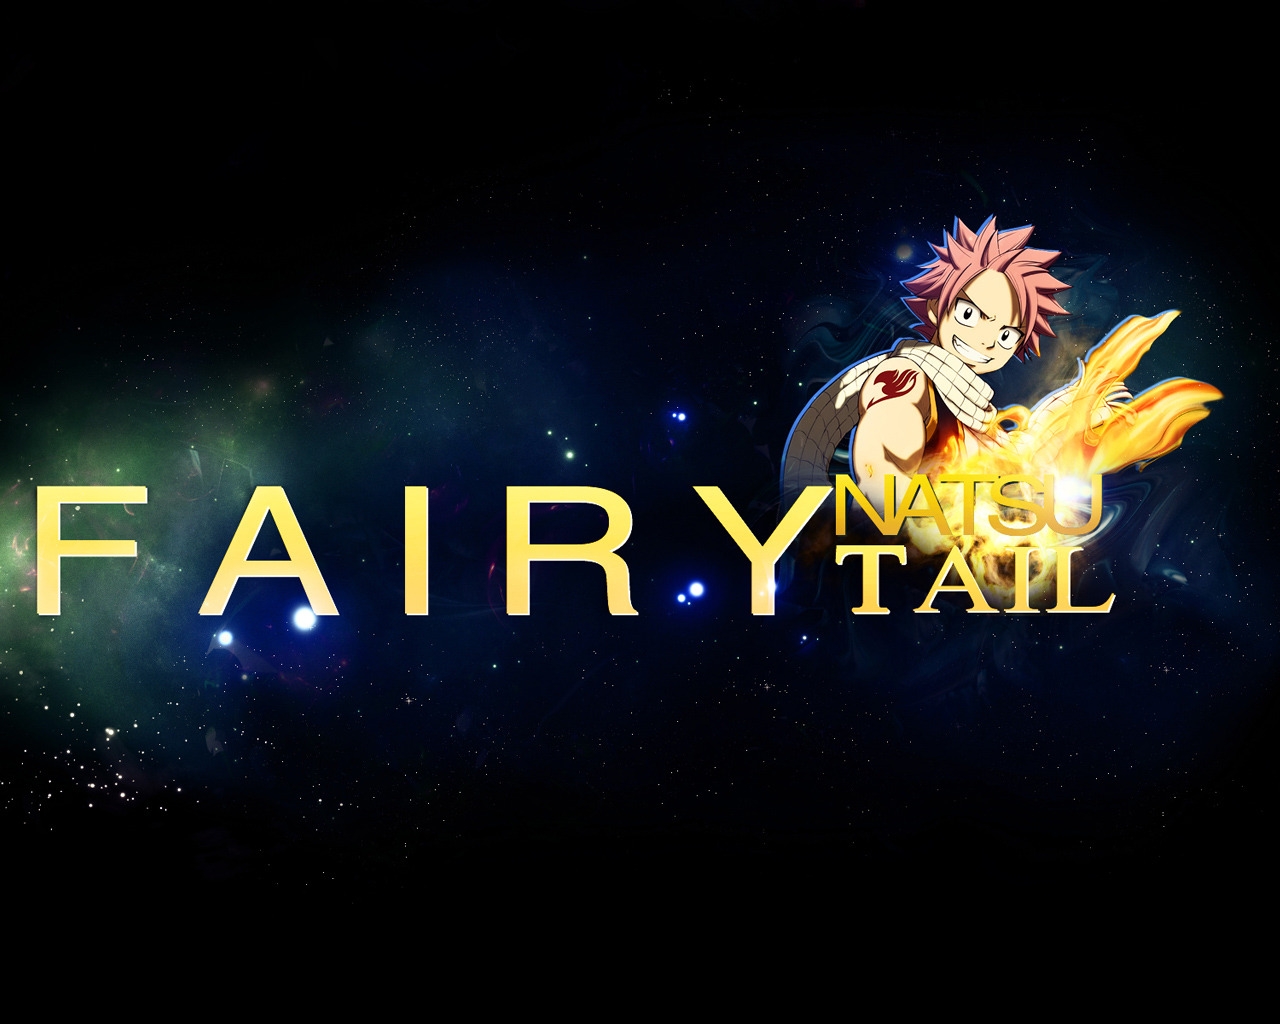 Fairy Tail Natsu for 1280 x 1024 resolution